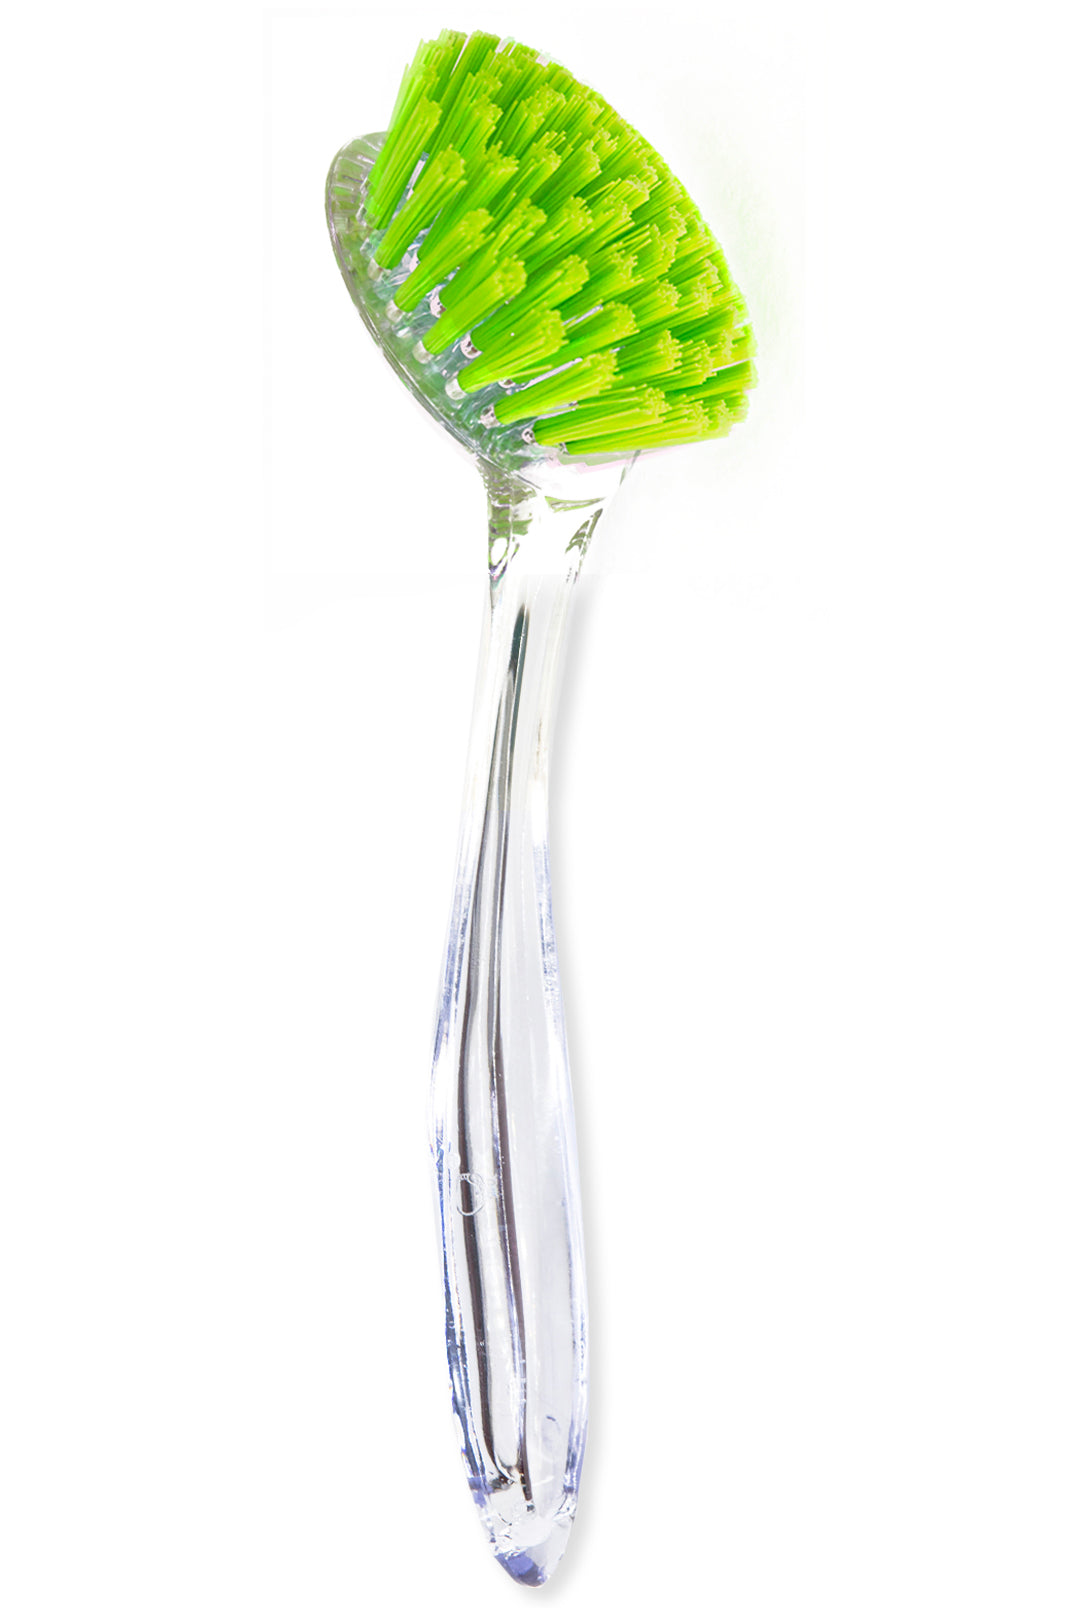 Ball Shaped Dish Brush - Kitchen - Blue - Green - Easy to Use